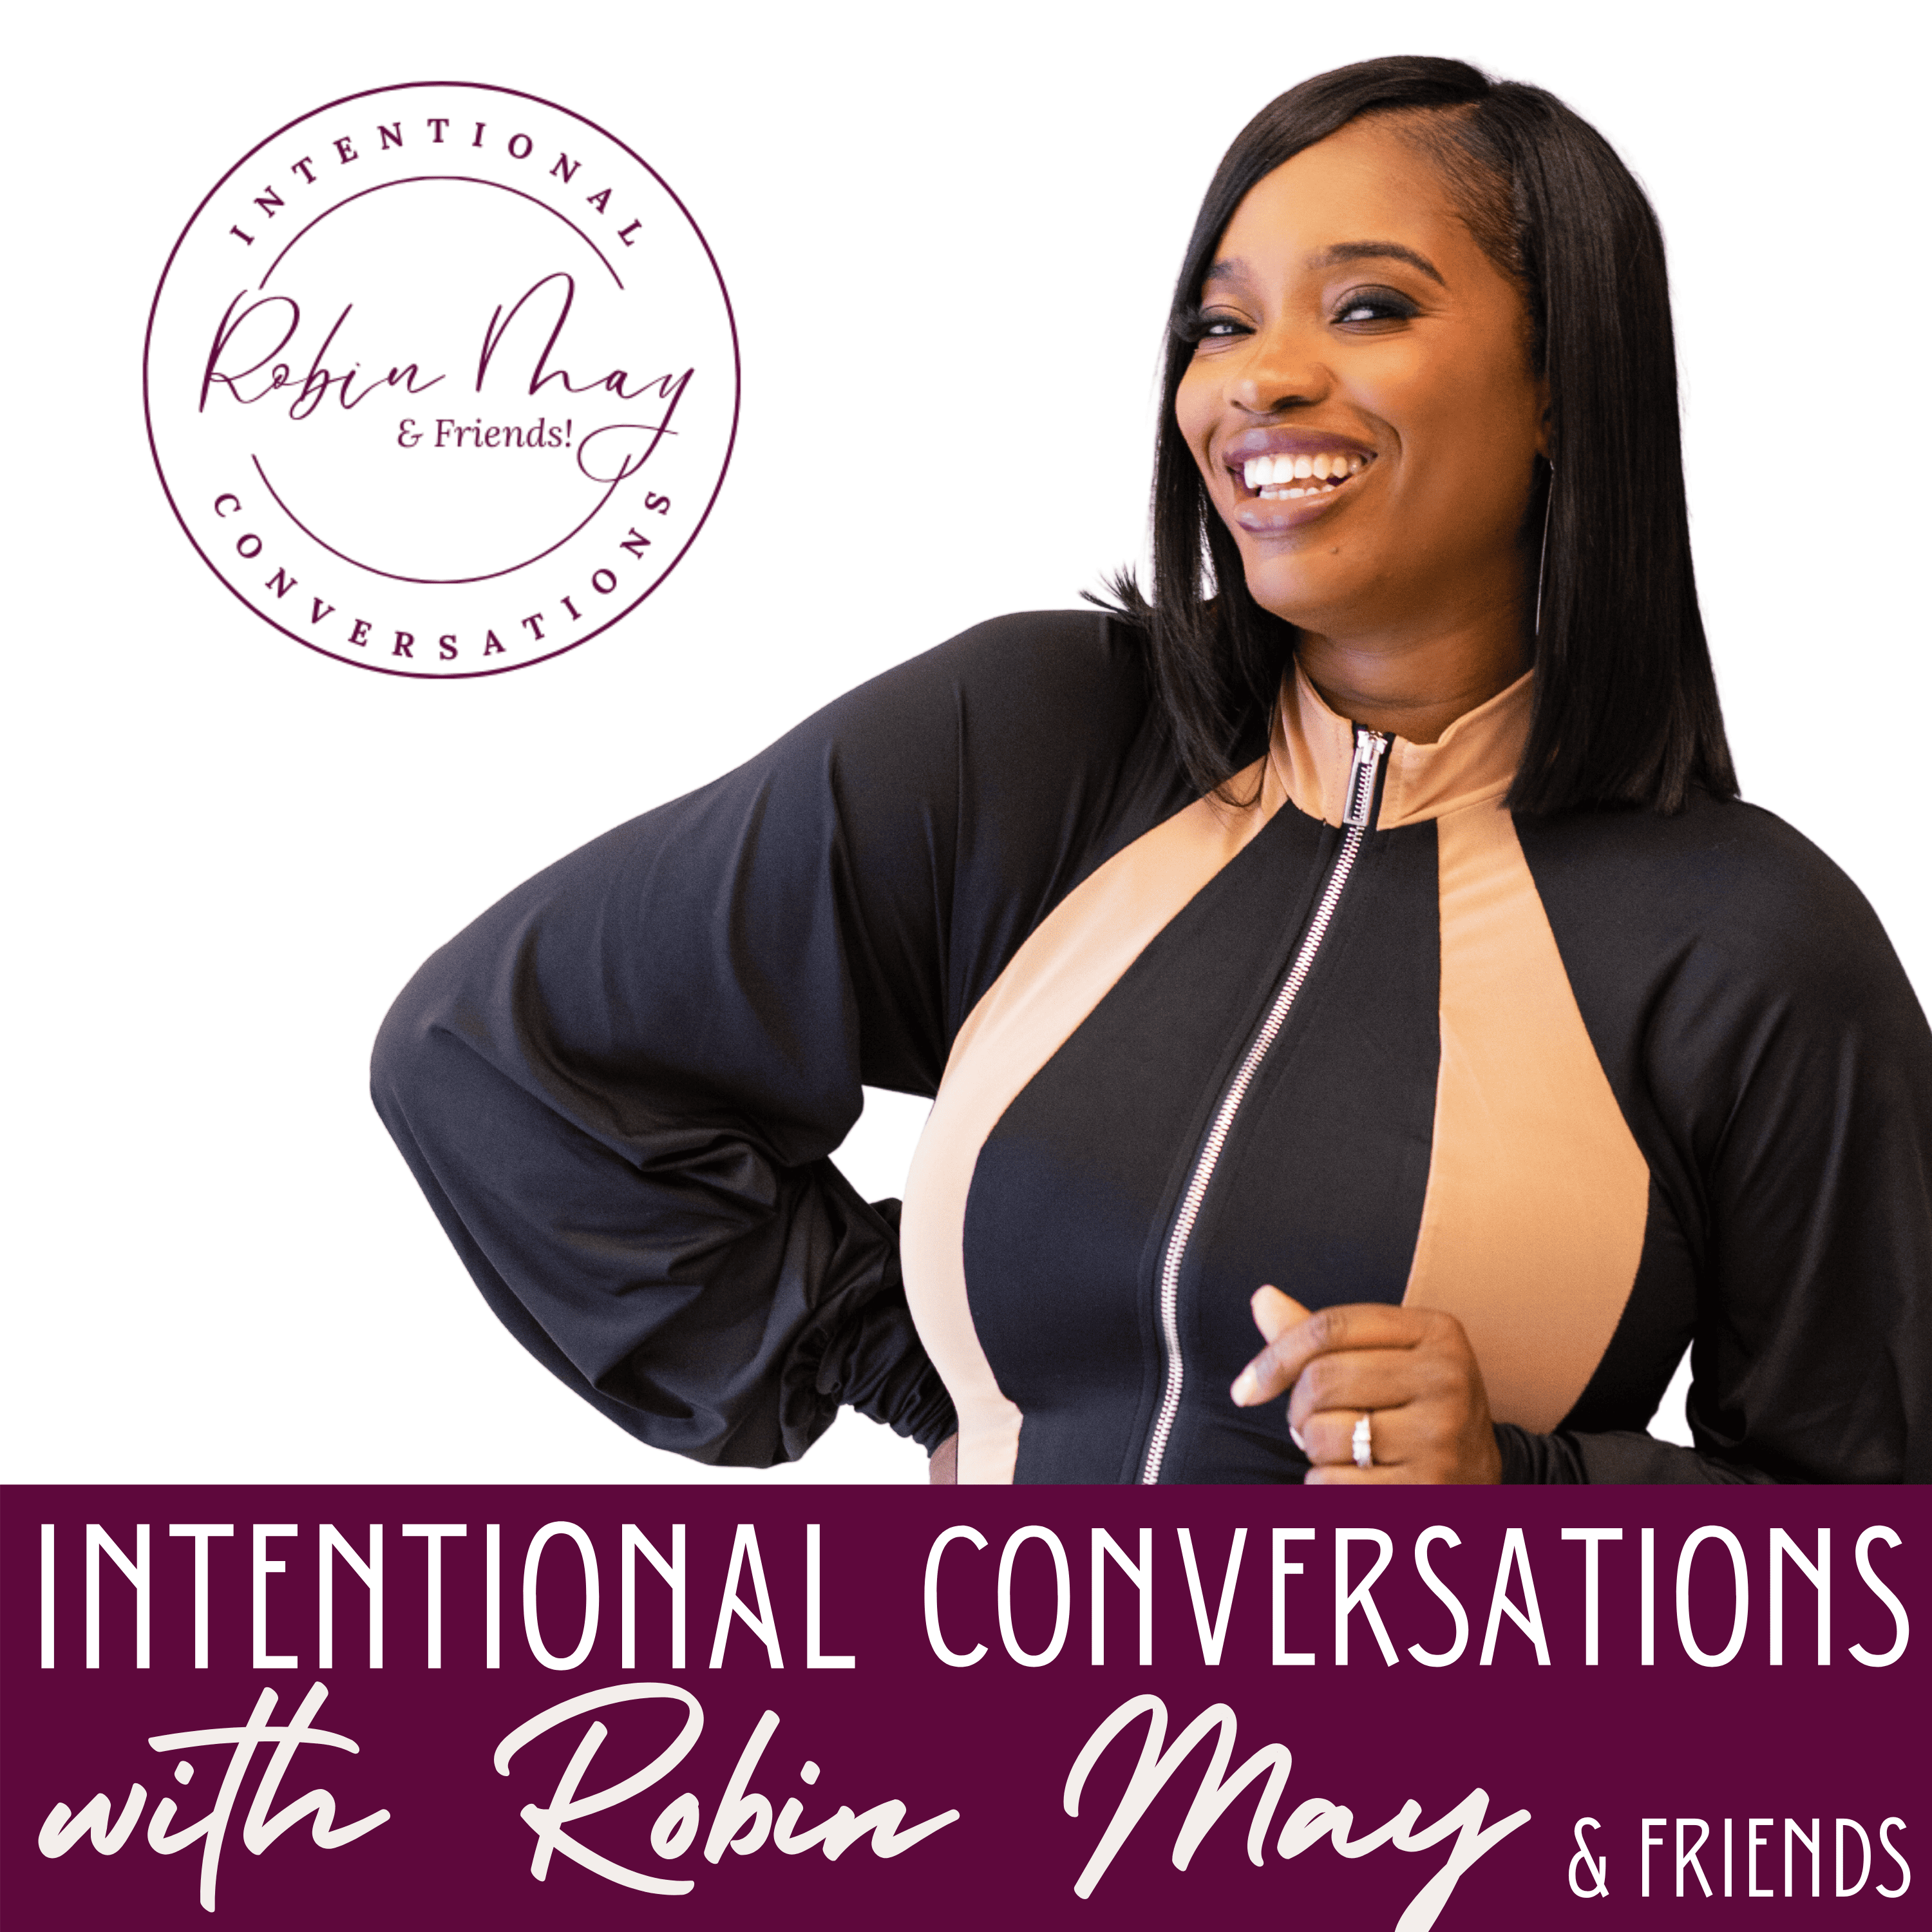 Artwork for podcast Intentional Conversations with Robin May & Friends